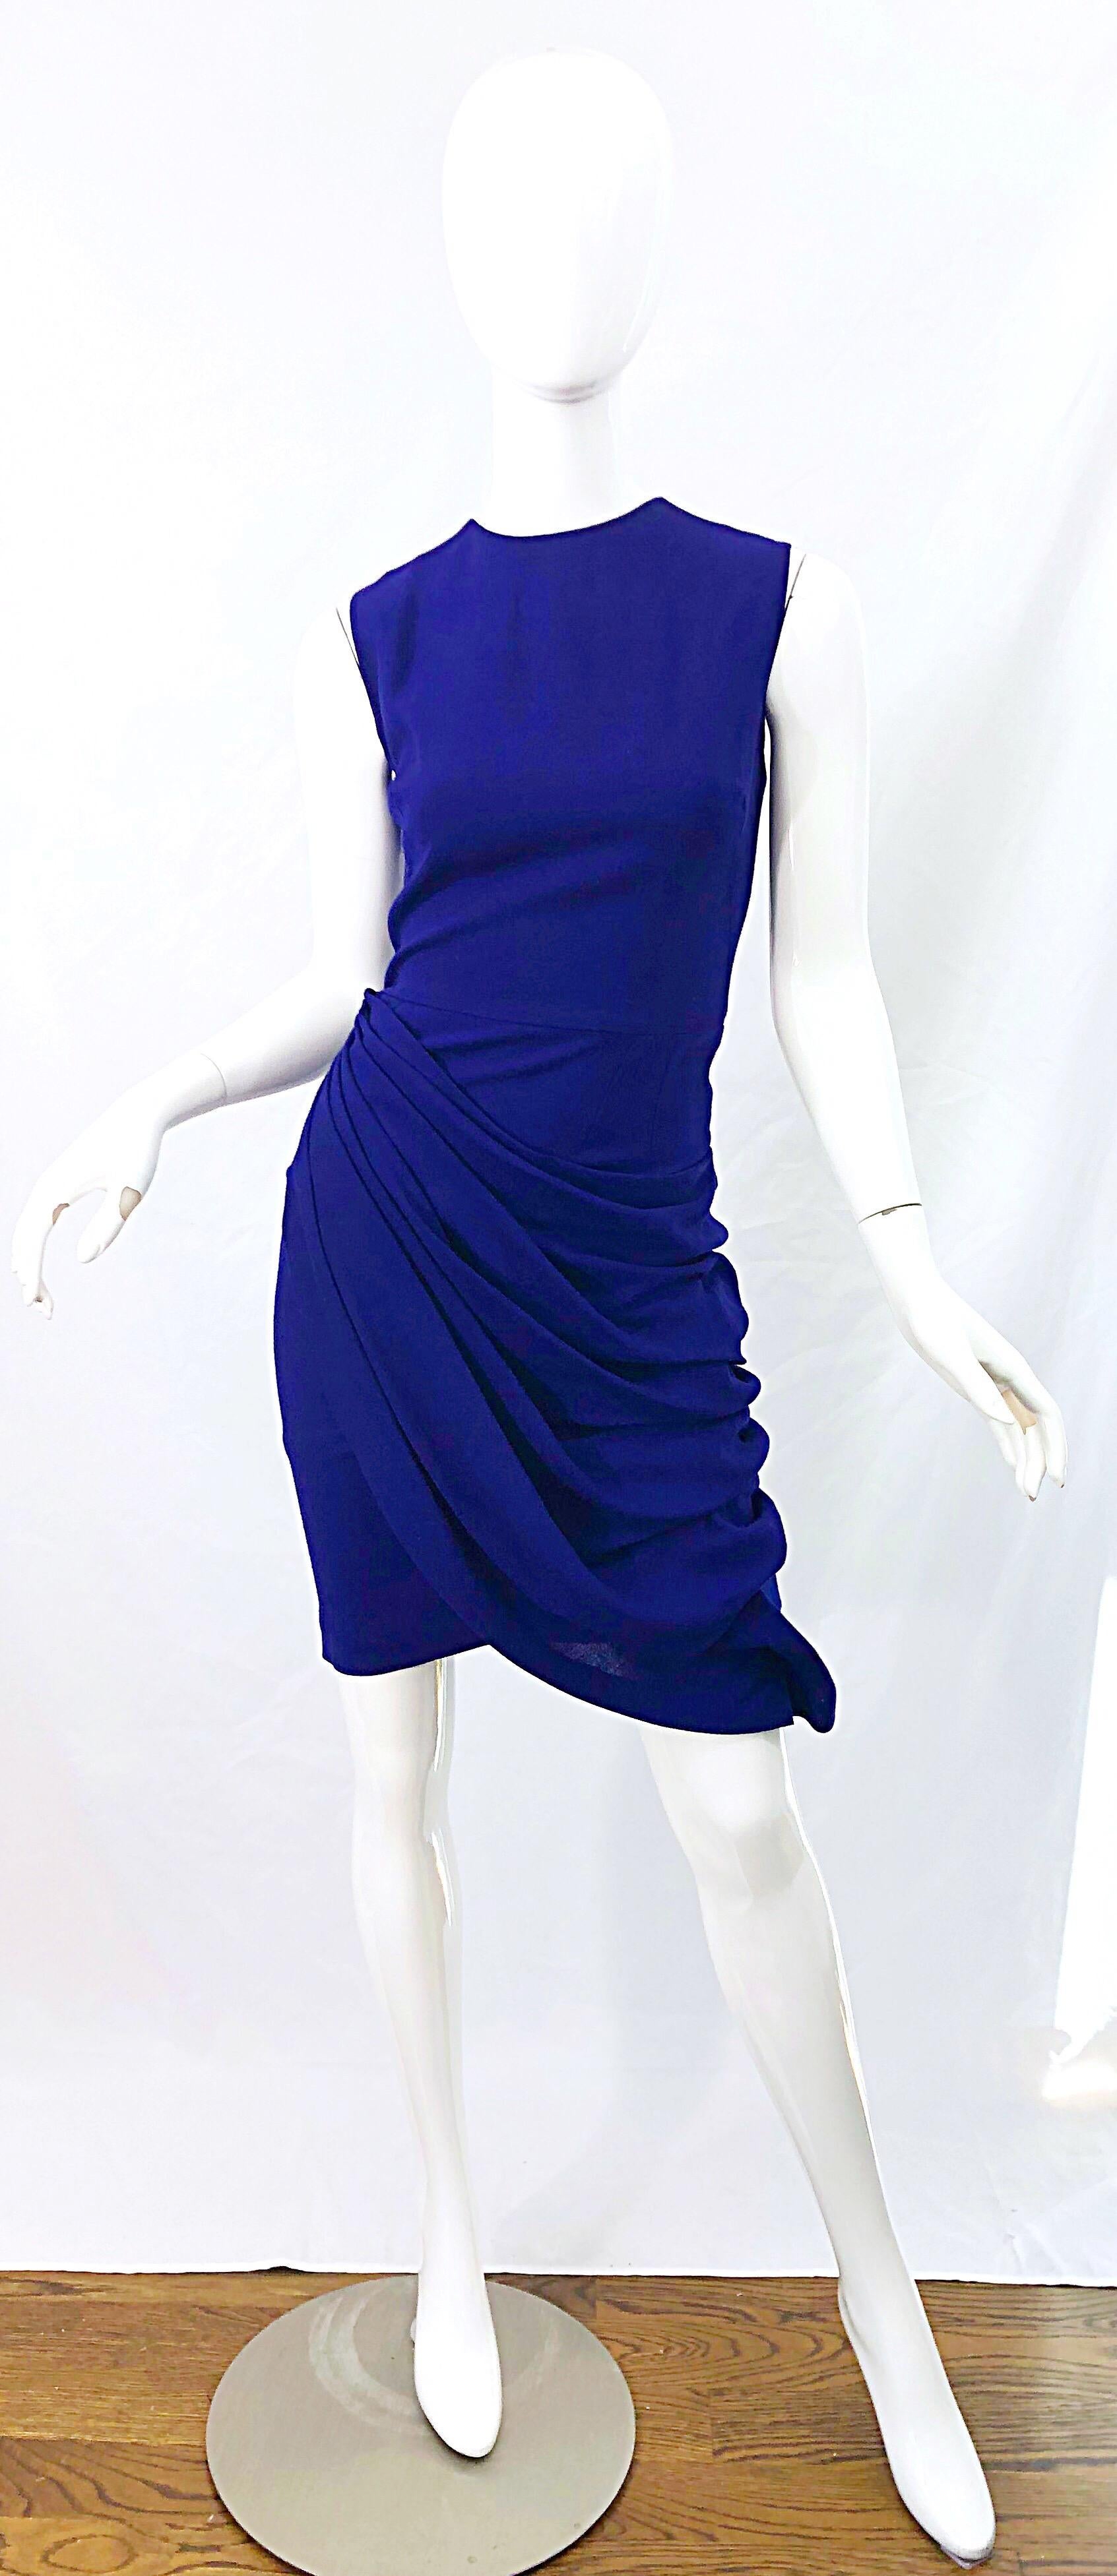 Beautiful vintage early 2000s LORIS AZZARO purple ruched sheath dress ! Features a tailored bodice with flattering and forgiving gathered skirt. 15 large rhinestone buttons up the back. Very well made with heavy attention to details that mirror that